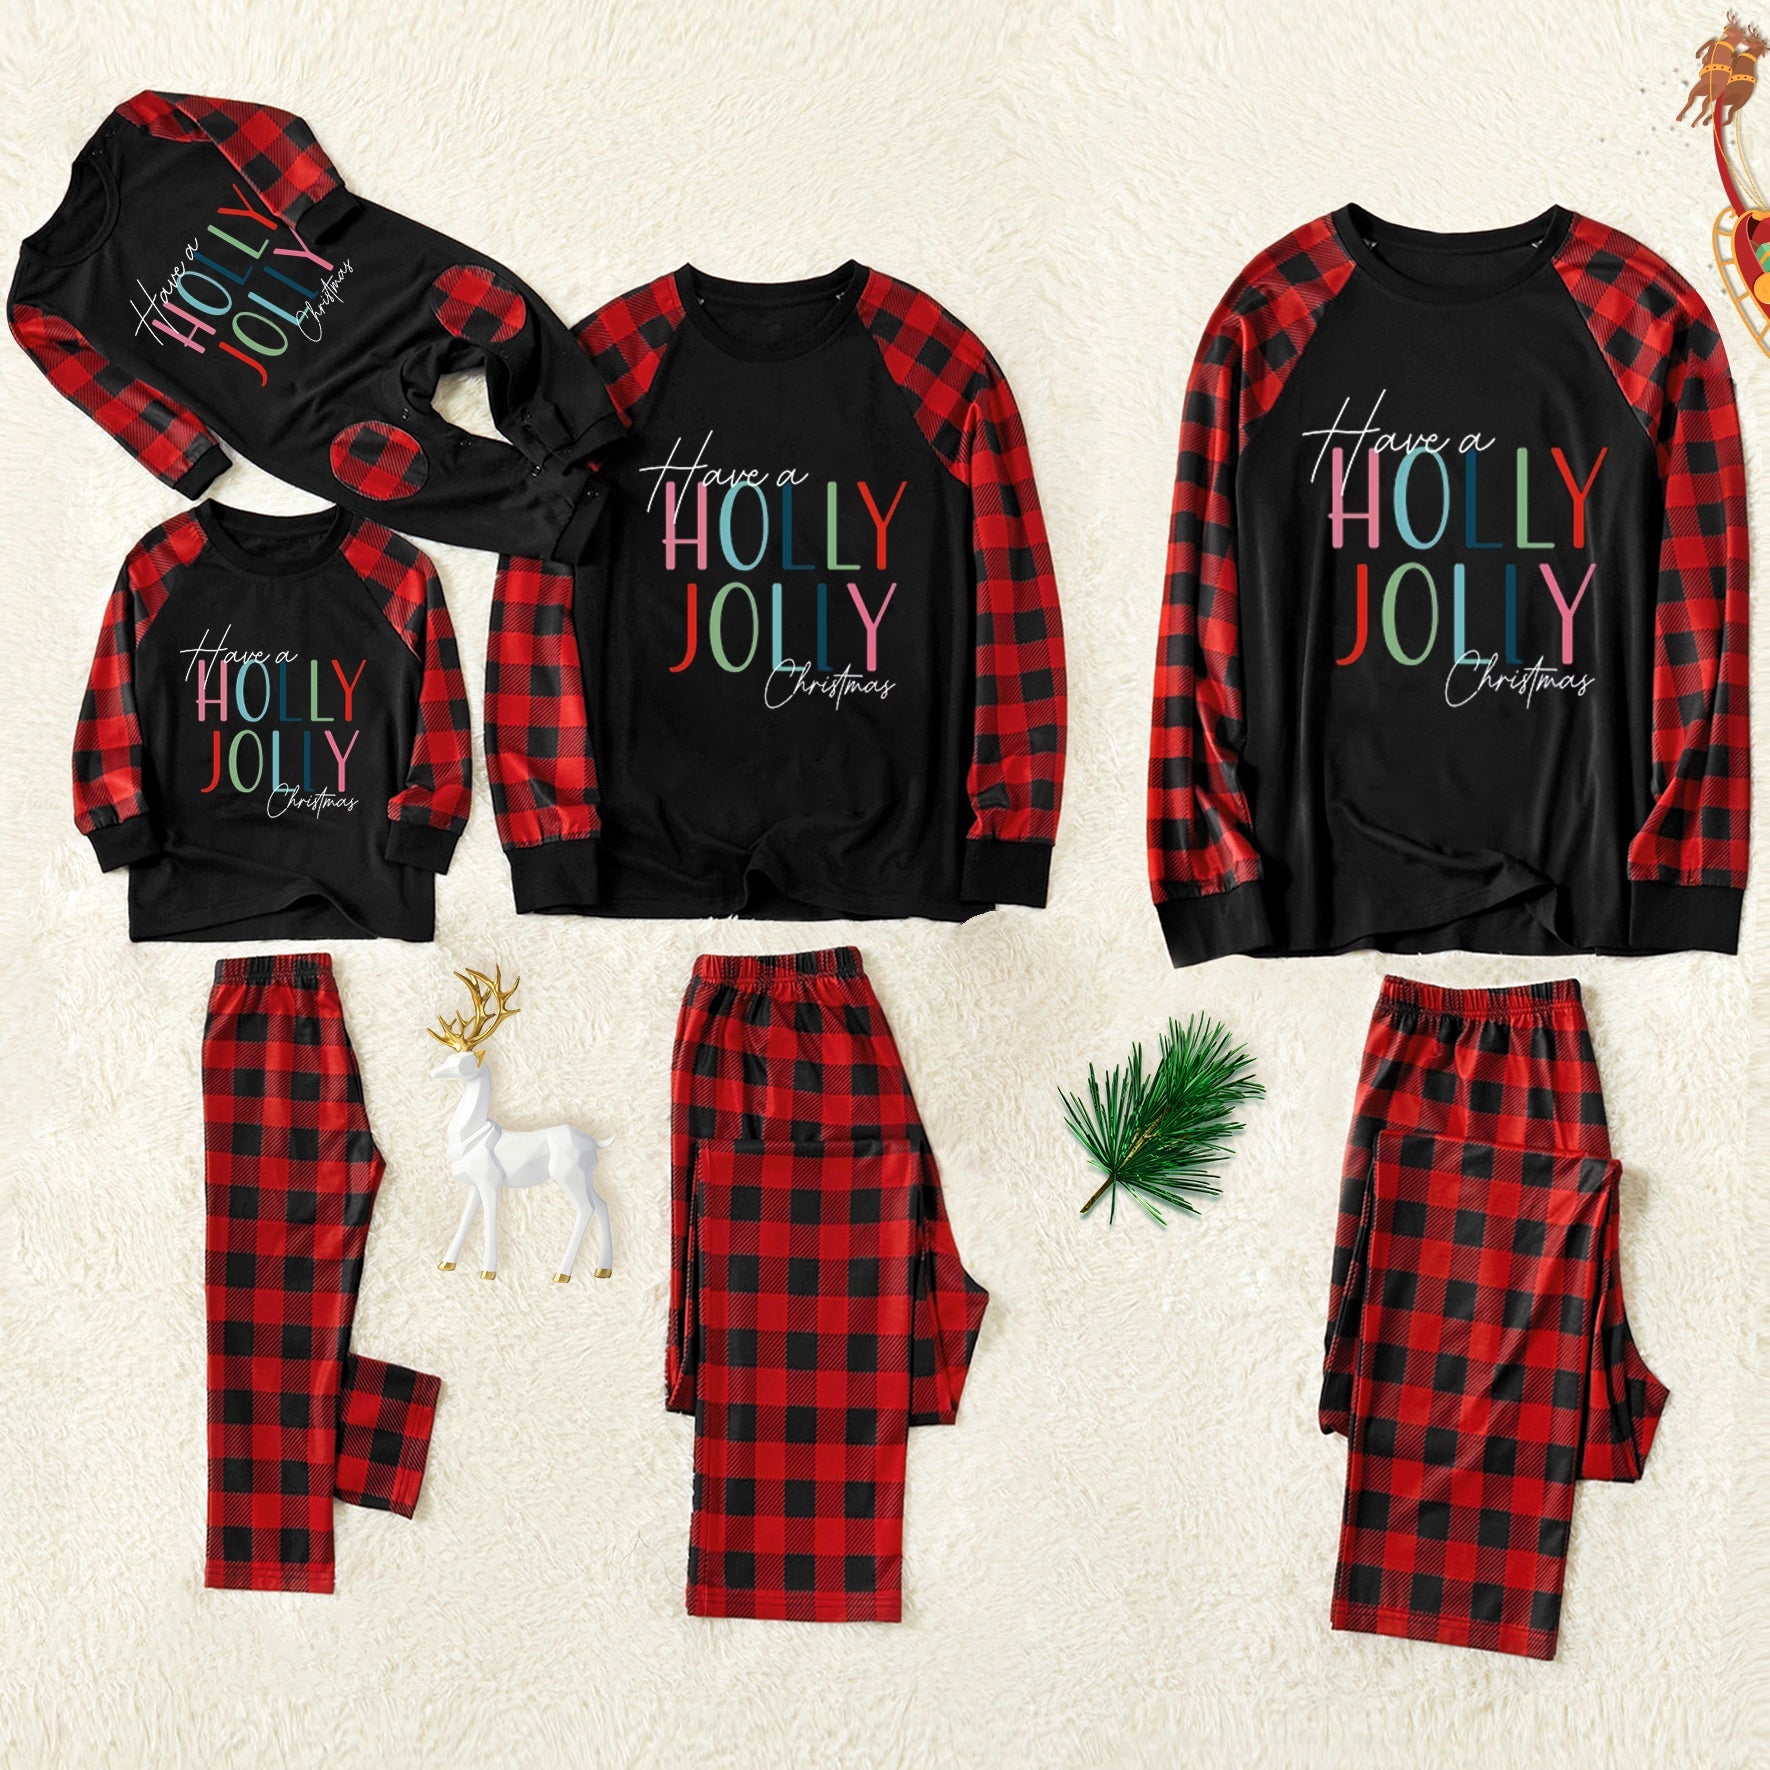 'Have a Holly Jolly Christmas' Letter Print Patterned  Contrast Black top and Black & Red Plaid Pants Family Matching Pajamas Set With Dog Bandana